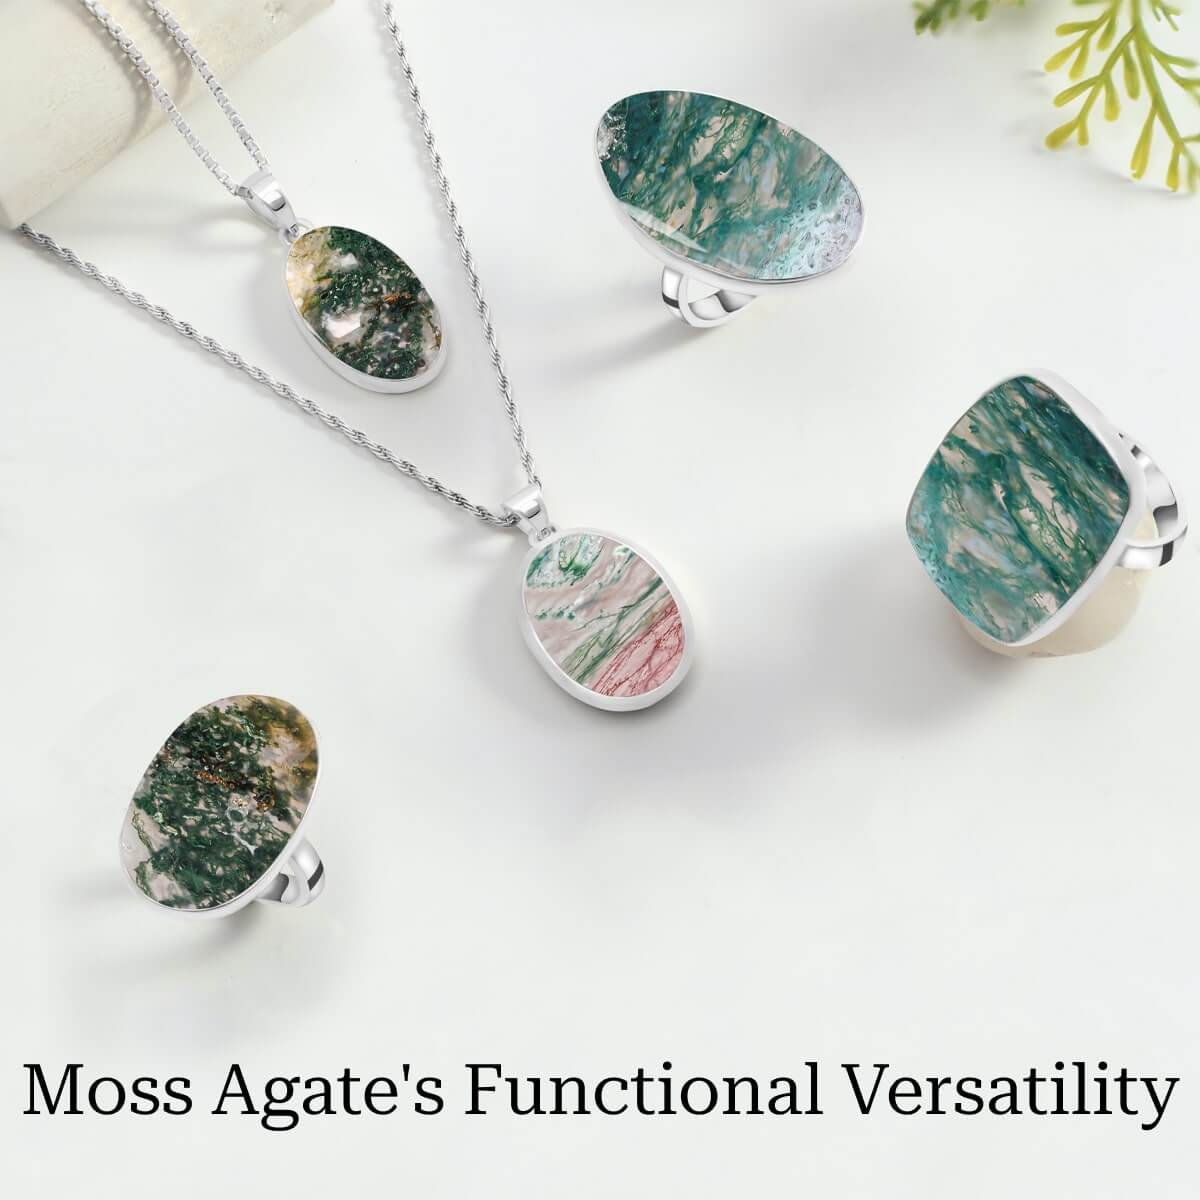 Moss Agate Uses